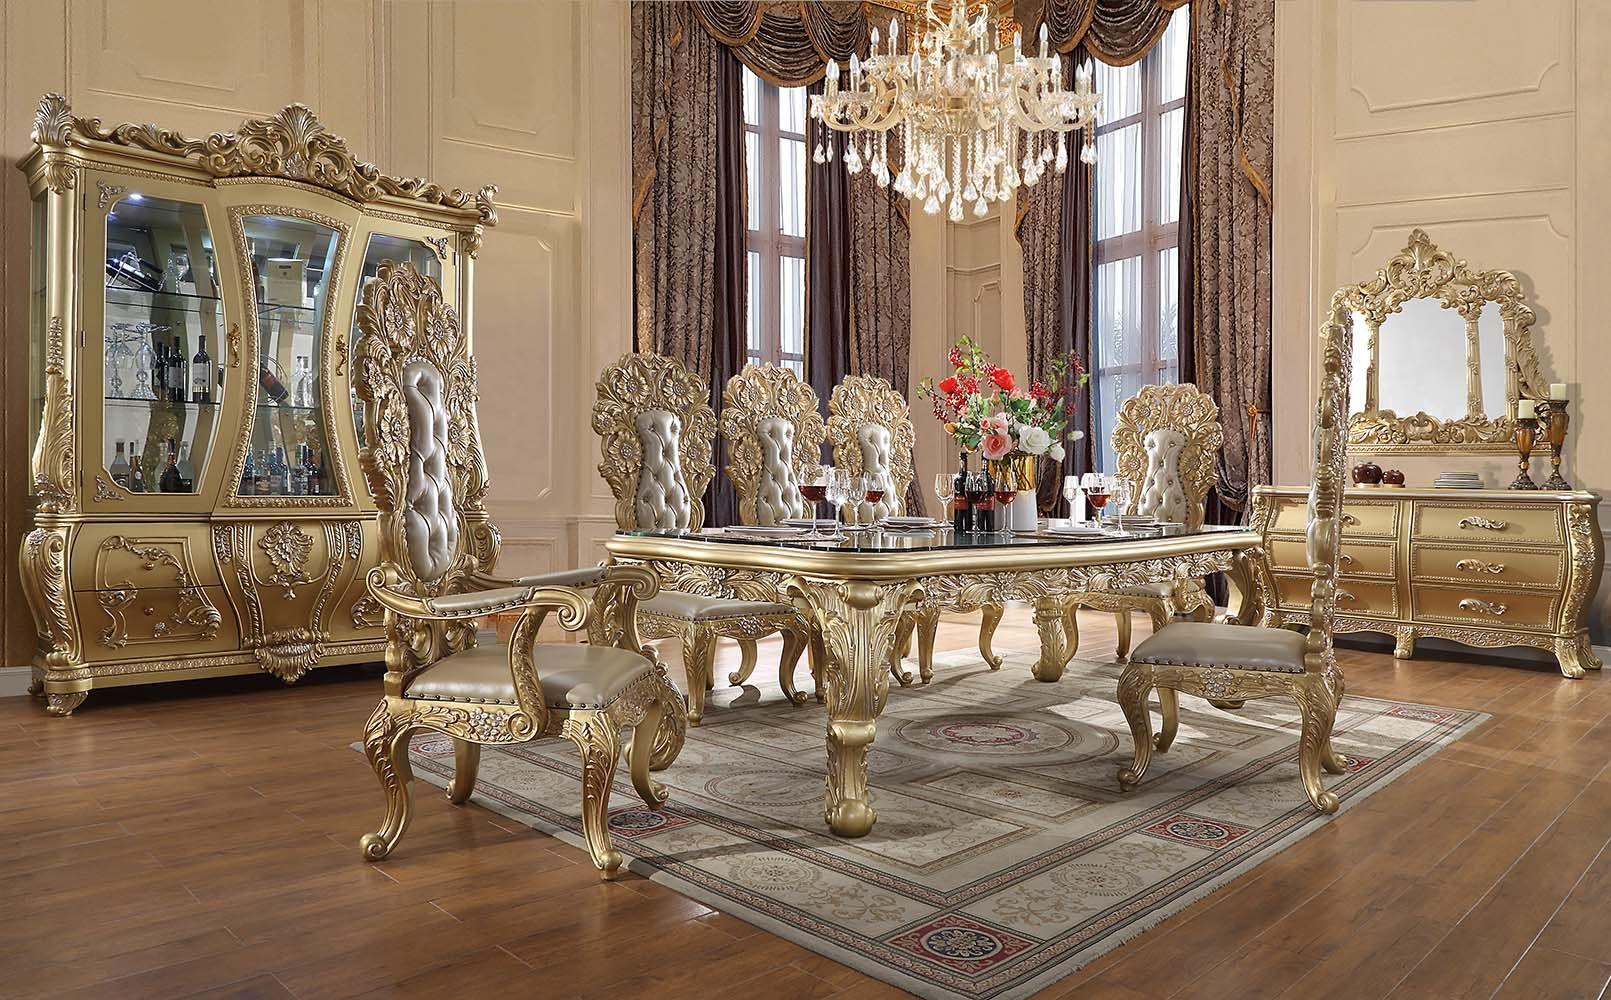 Classic Dining Room Set Cabriole Dining Room Set 7PCS DN01482-T-7PCS DN01482-T-7PCS in Gold PU